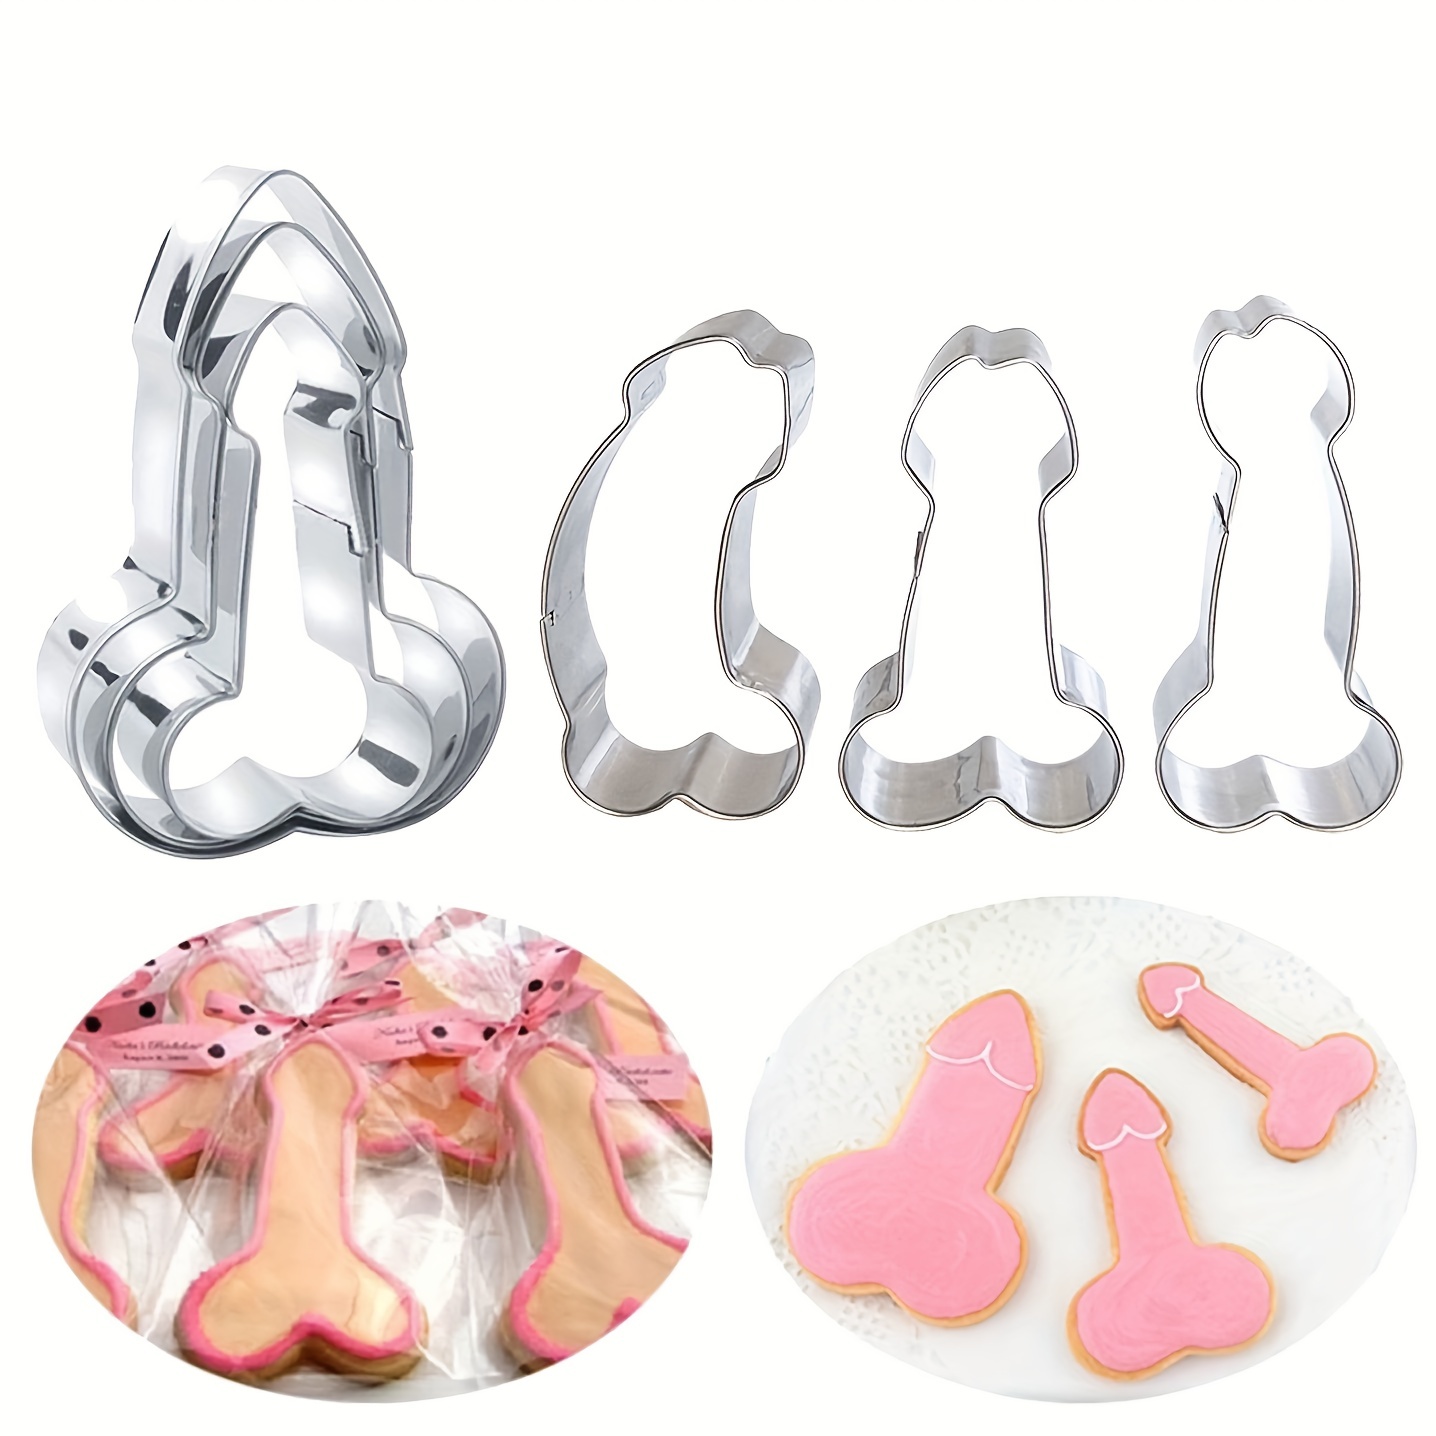 FUNNY 3D Penis Shaped Cake Mould Dick Silicone Soap Fondant Mold Bachelor  Party Sexy Pastry Decorating Kitchen Baking Accessorie